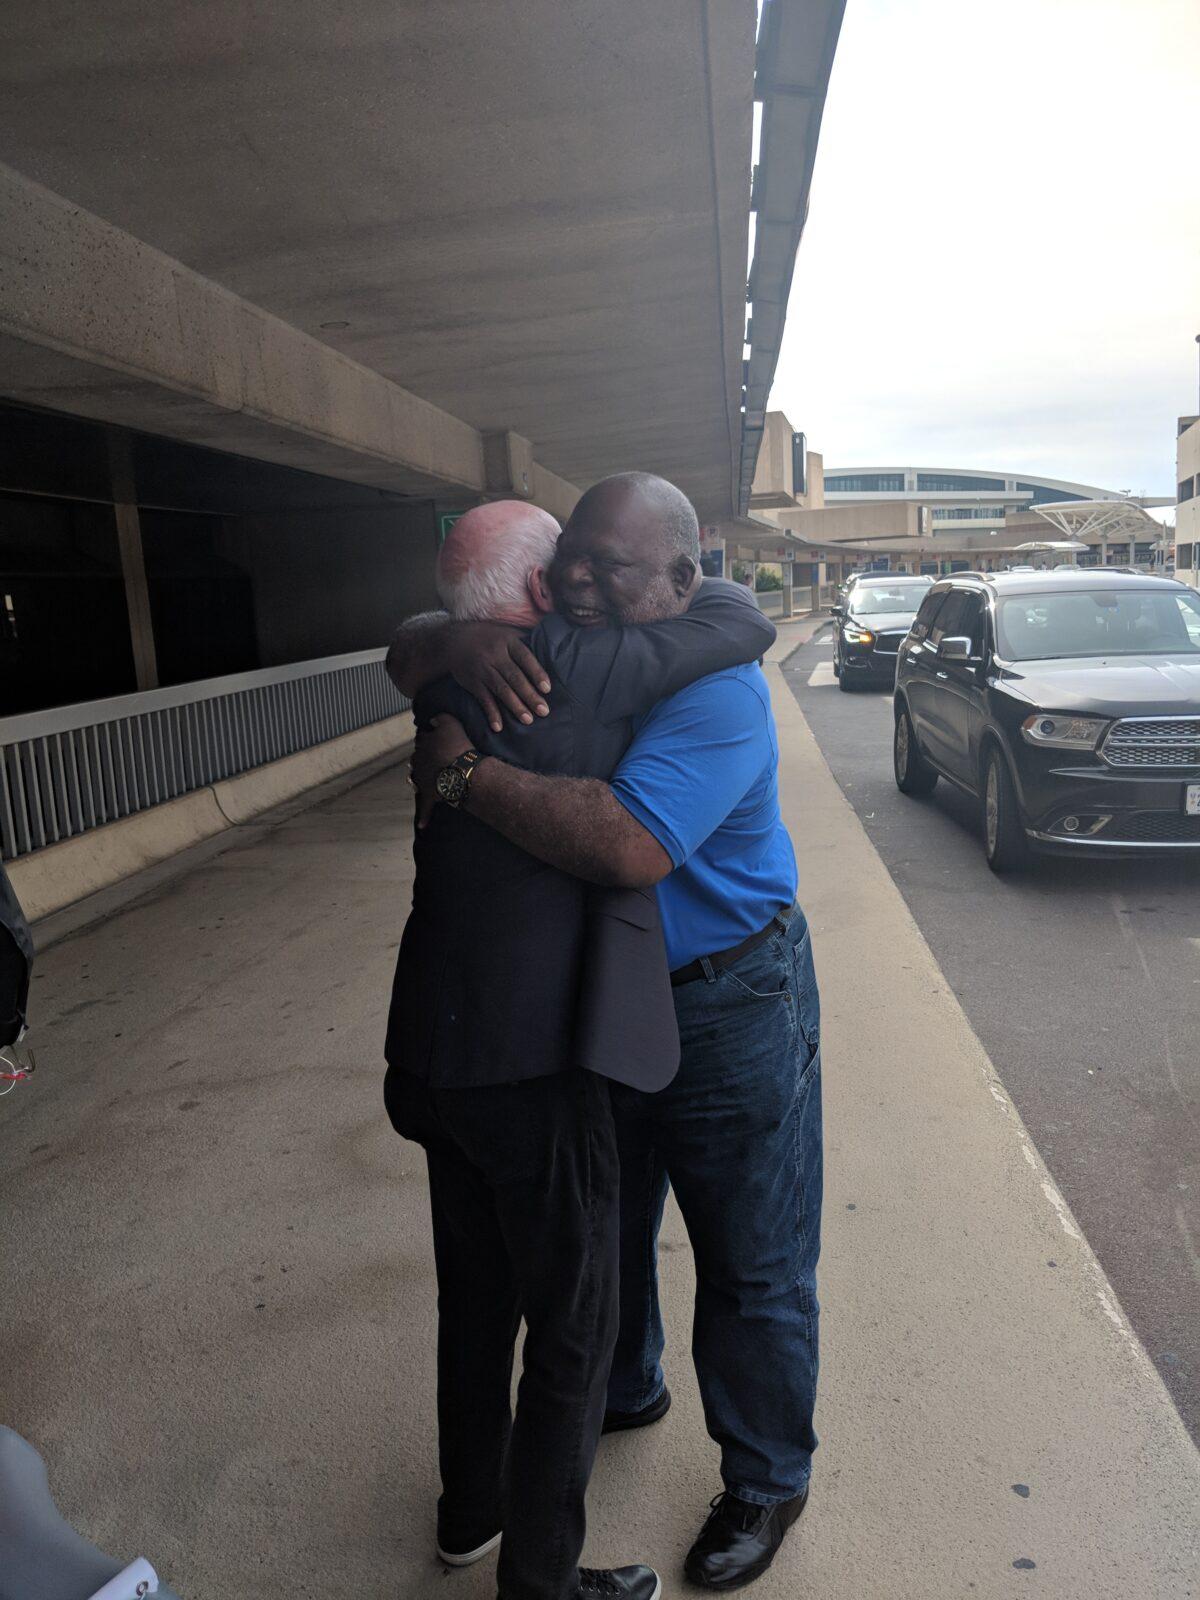 Ed Boran and Willis Turner meeting in Dallas, 51 years after serving together in Vietnam. (Courtesy of Ed Boran)